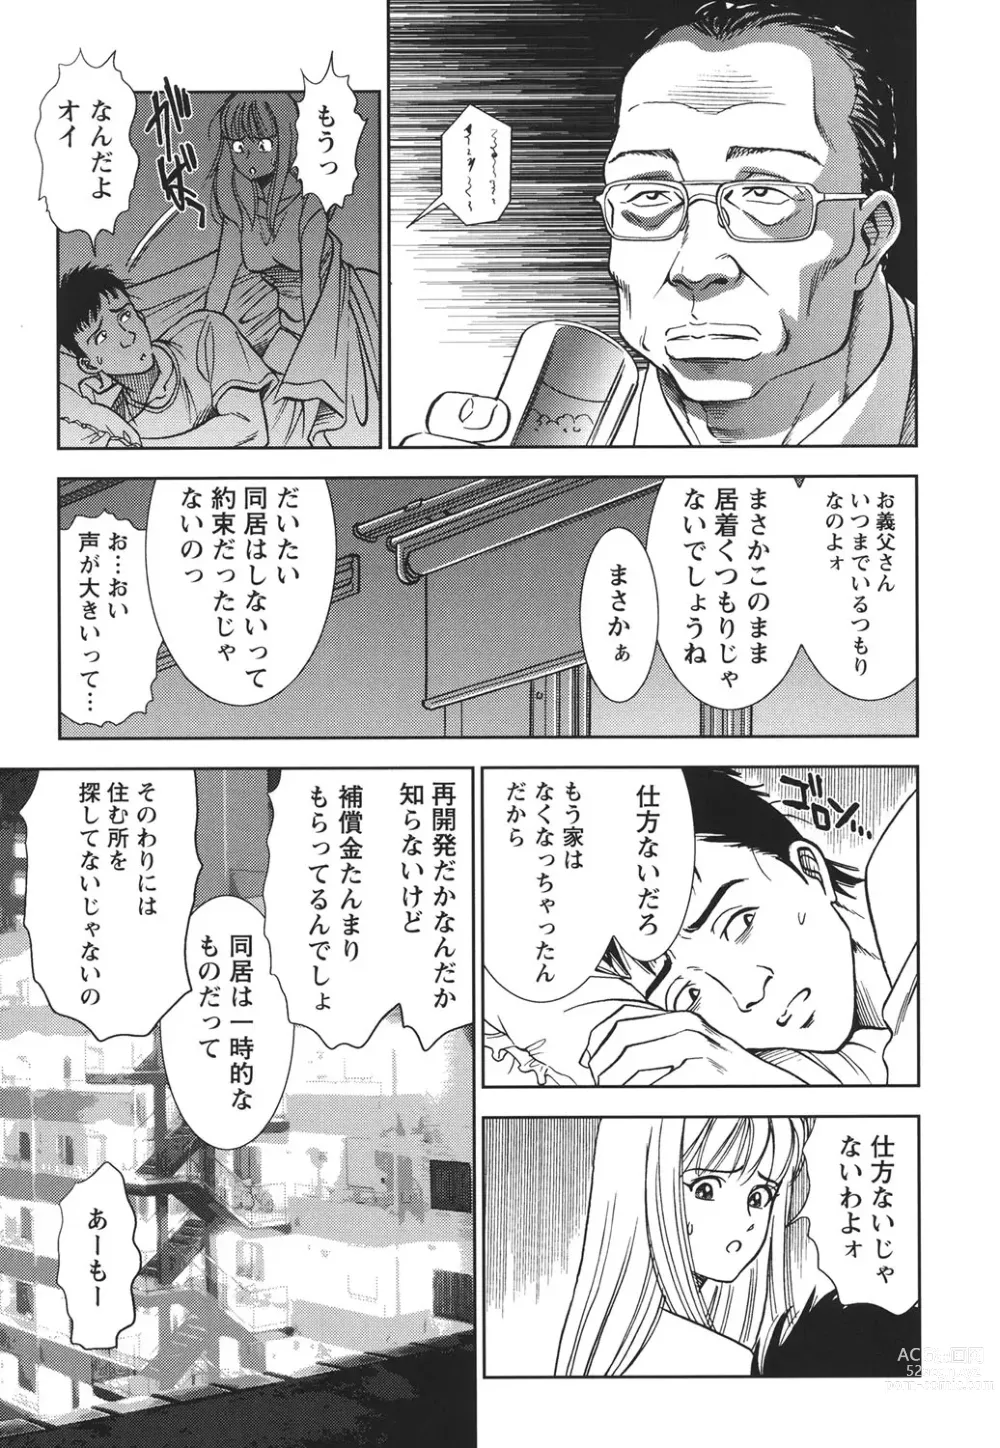 Page 8 of manga Haitoku no Meikyuu - a married woman got lost in the labyrinth of immorality